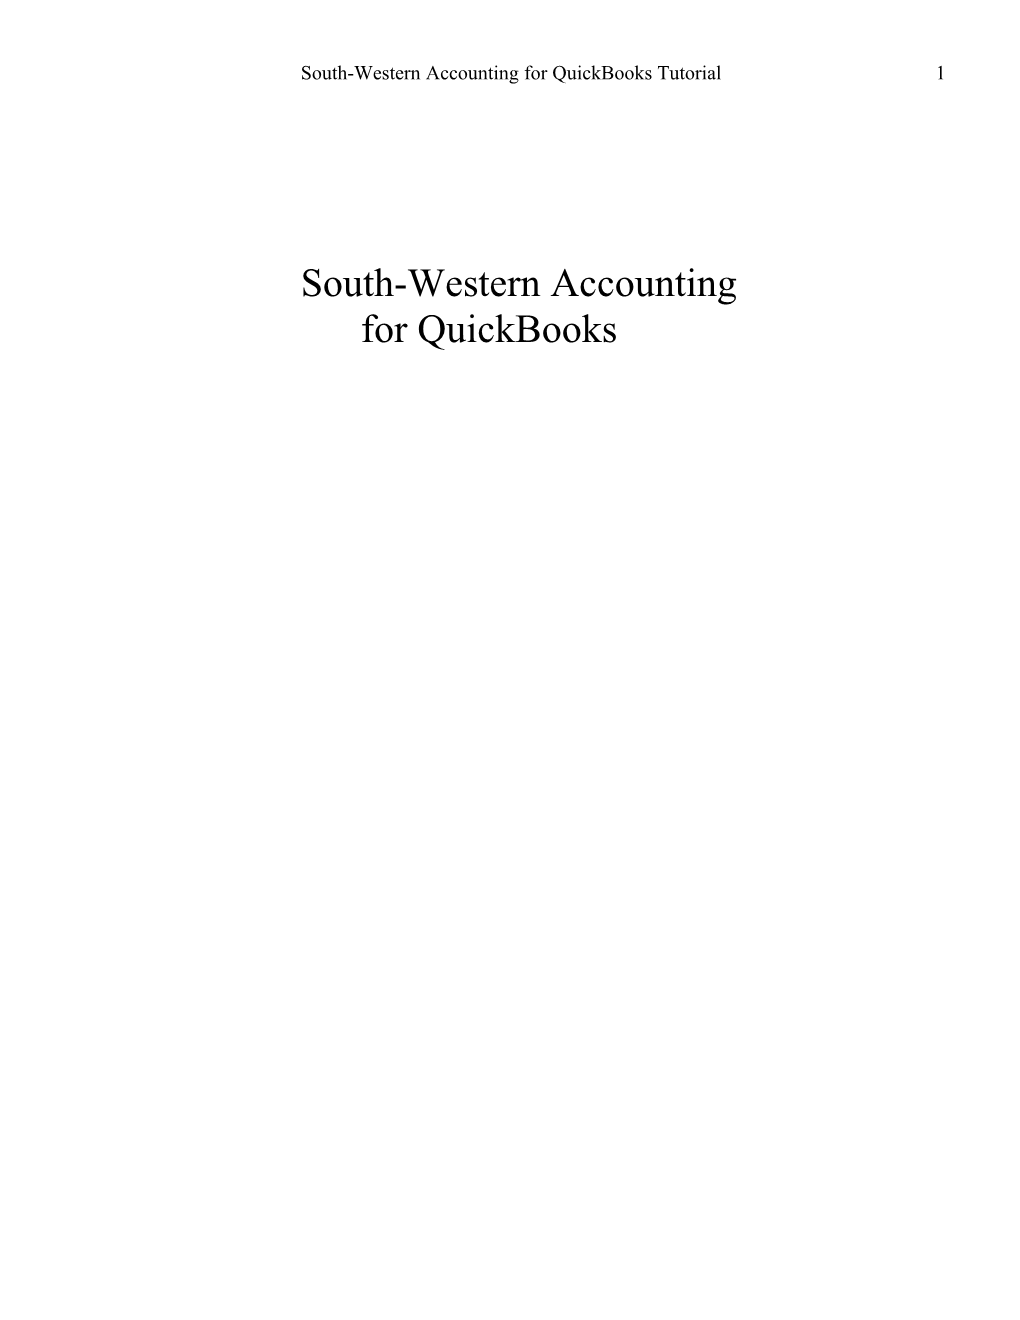 South-Western Accounting for Quickbooks Tutorial1